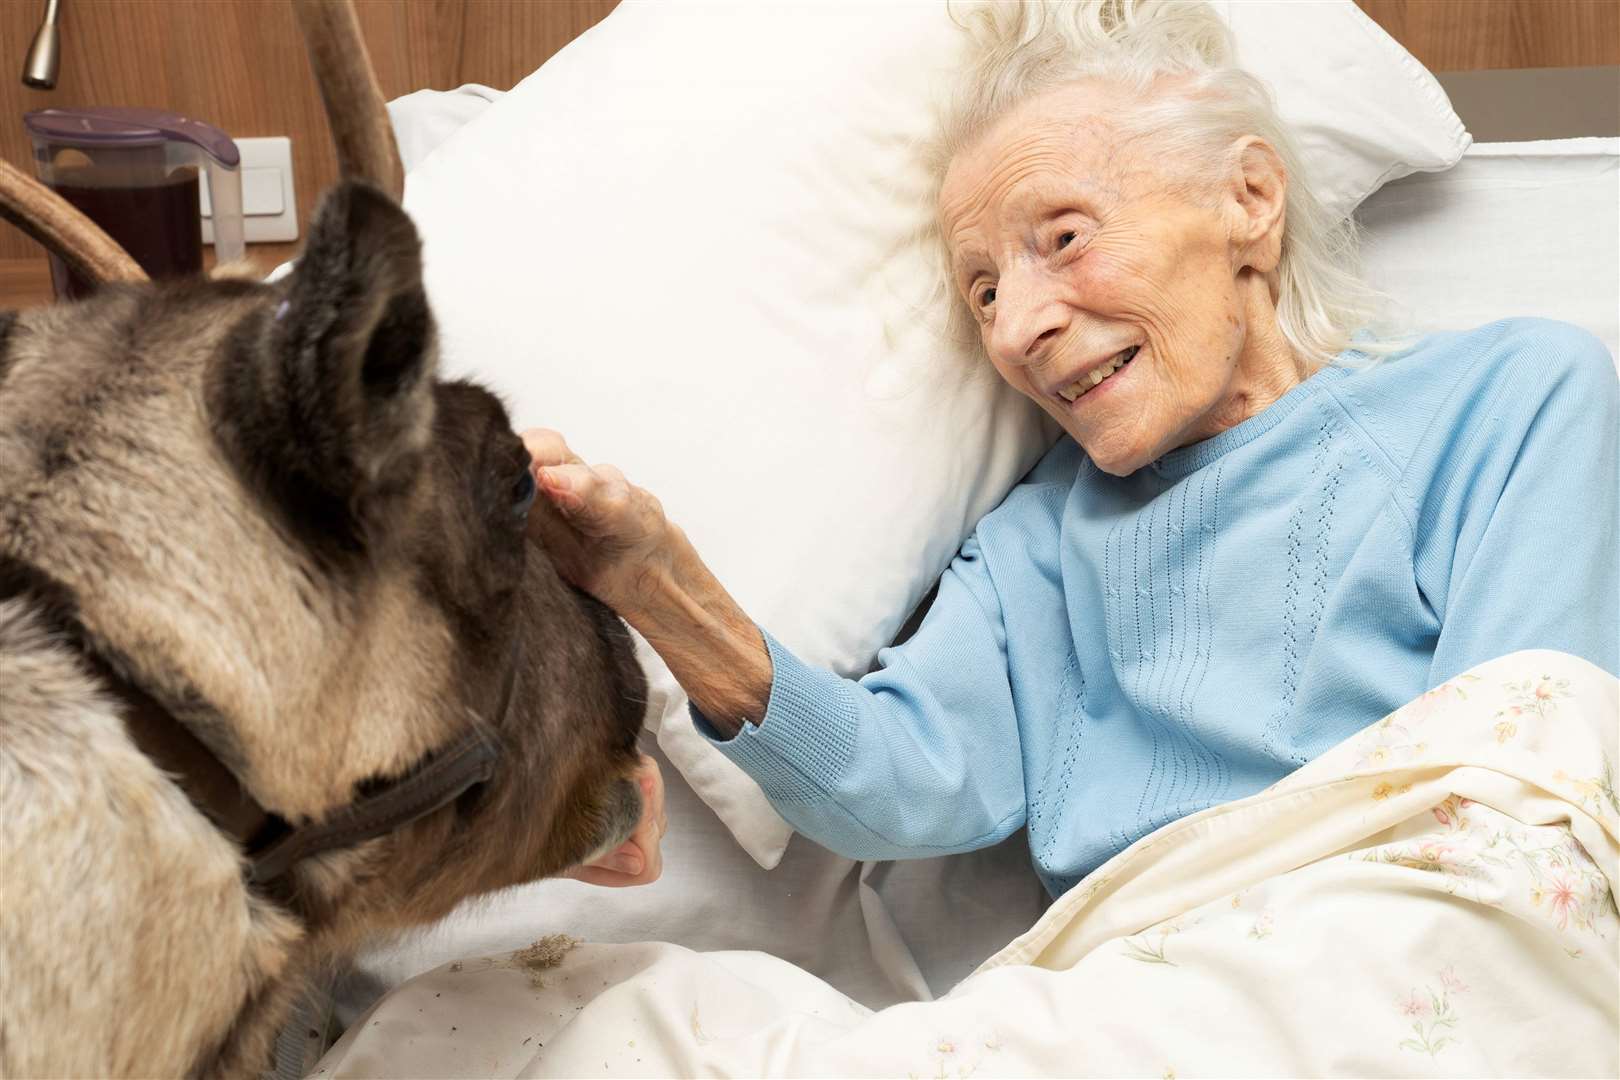 Elsie was filled with joy after petting the reindeer. Picture: Heathfield Court care home